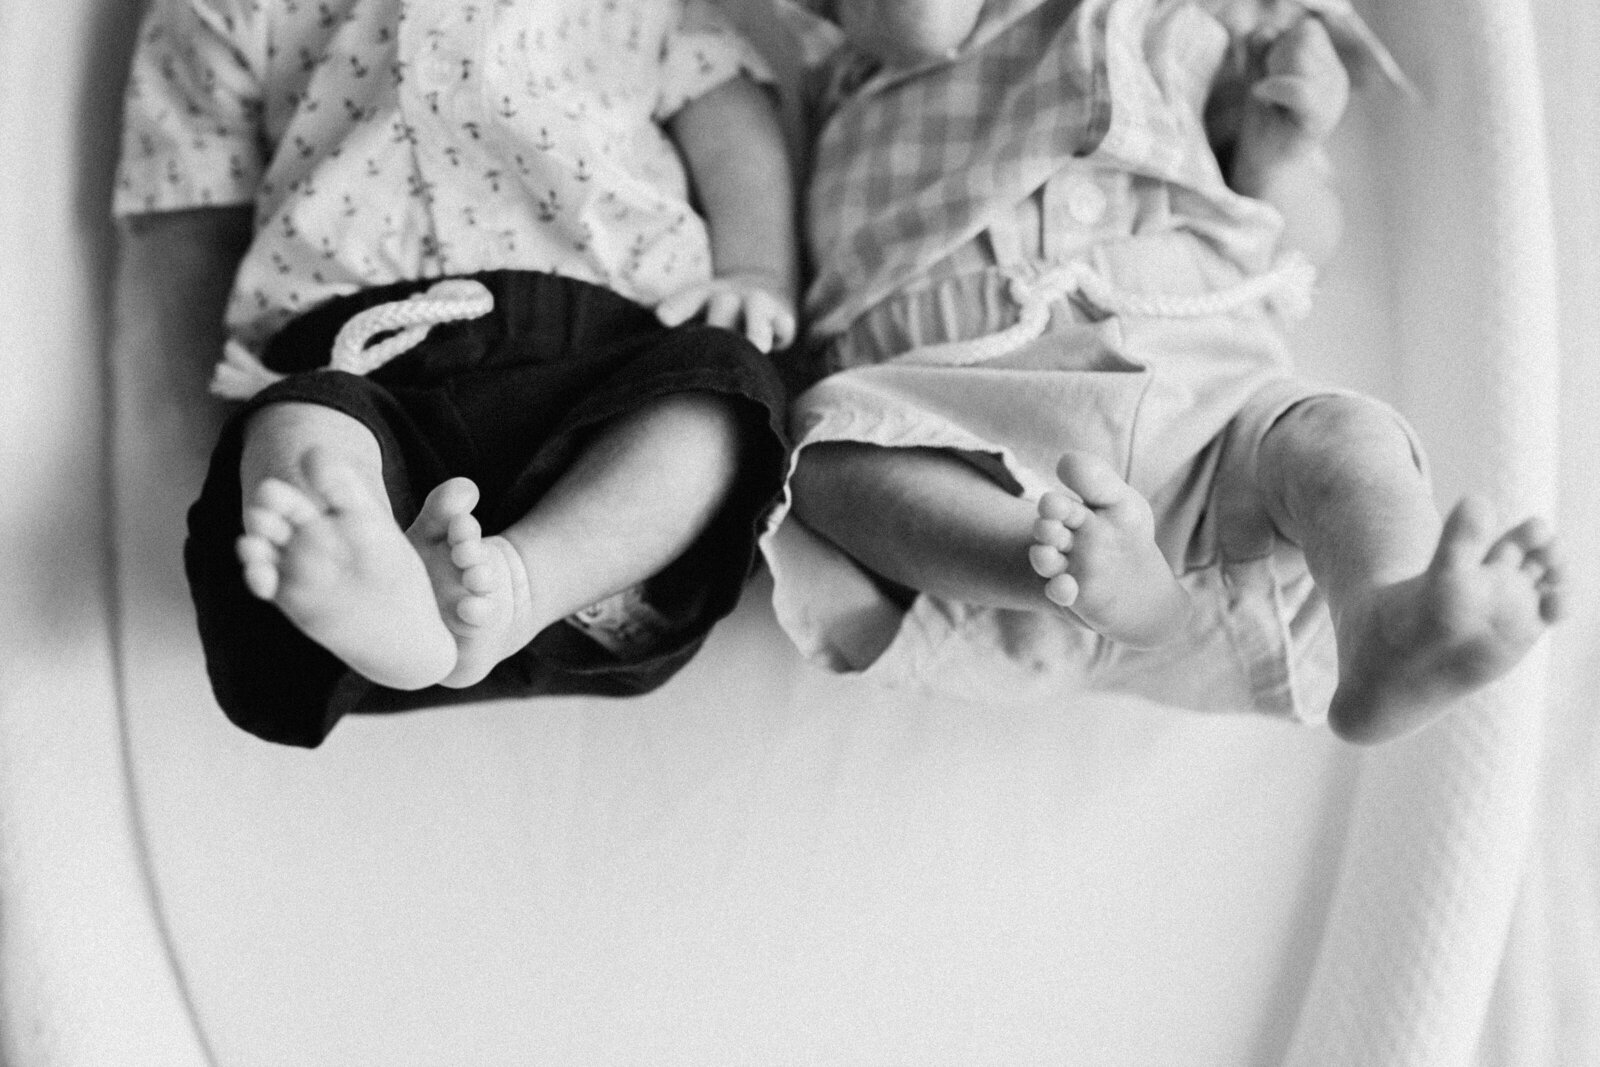 A black and white photo of twin baby feet sticking up in the air together